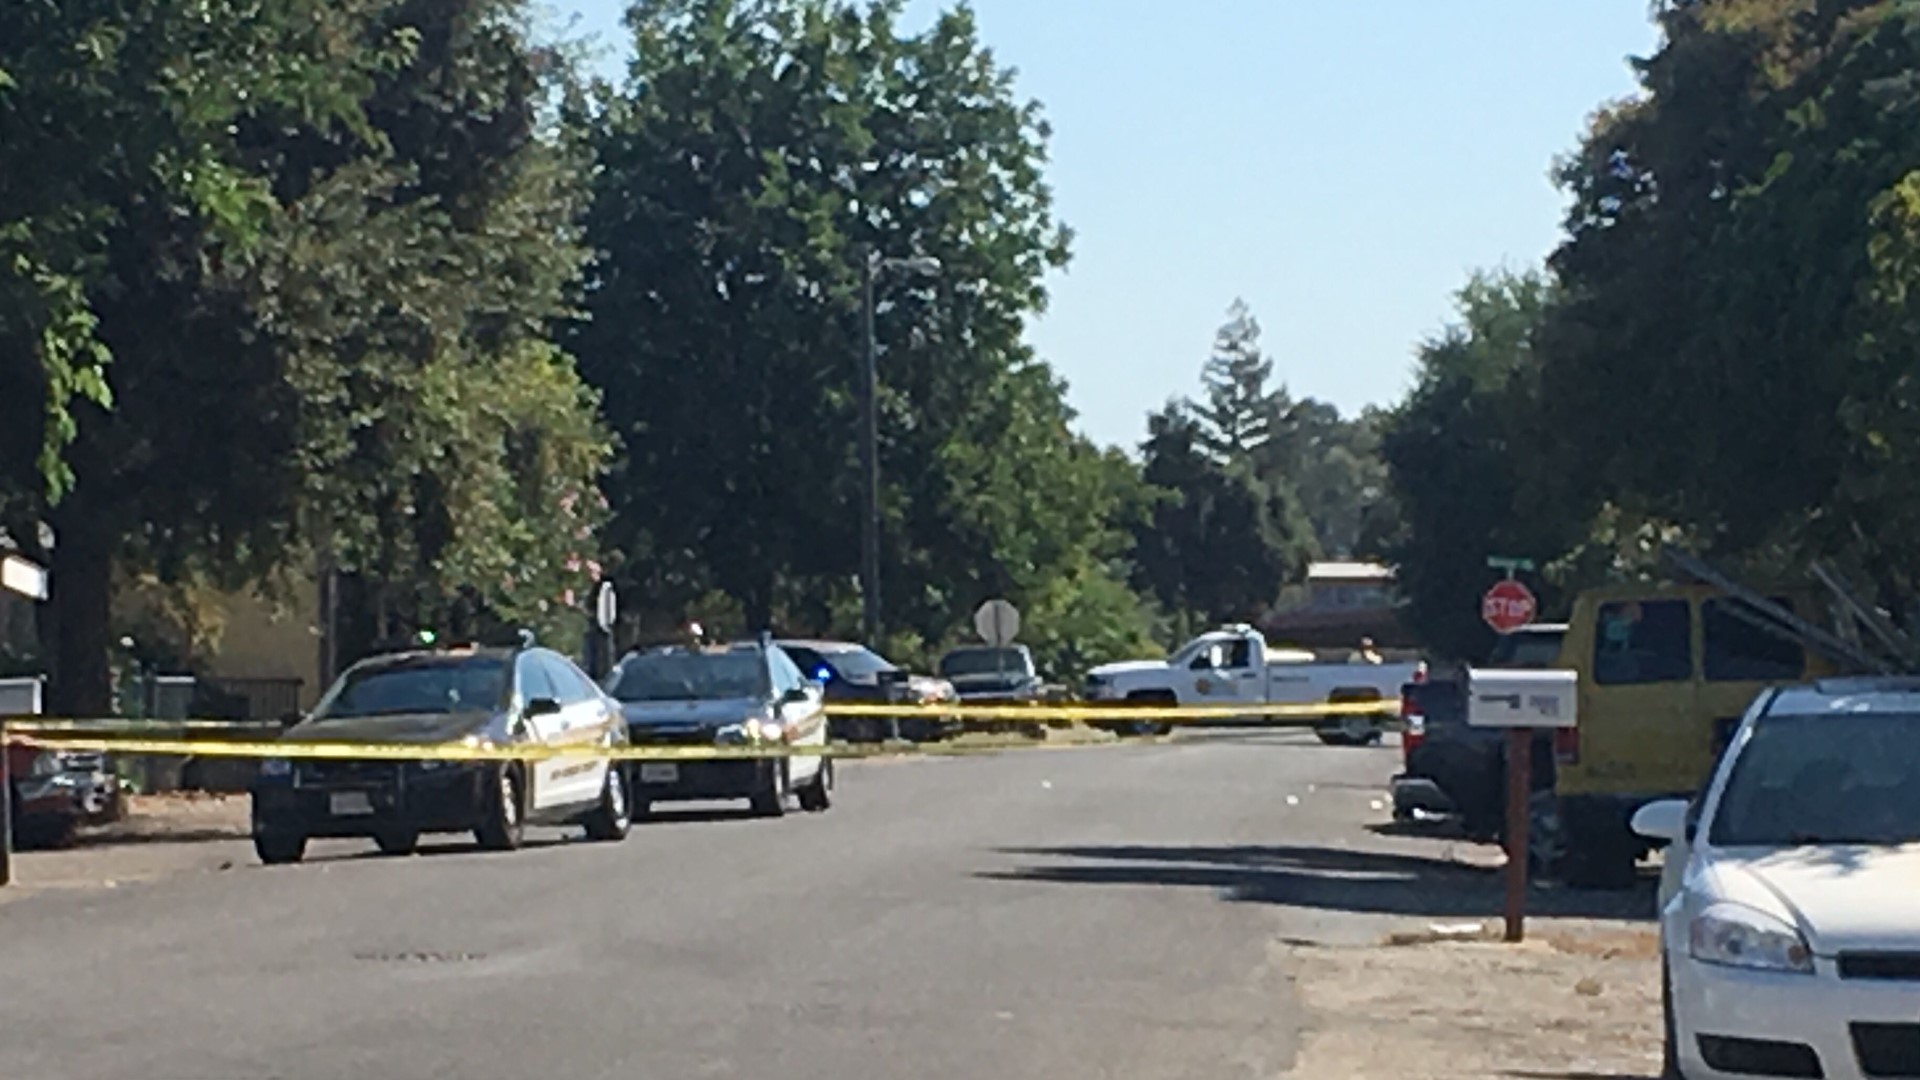 San Joaquin deputies shot and killed a man Tuesday morning in Stockton after he allegedly pointed a gun at them, sheriff's officials say.